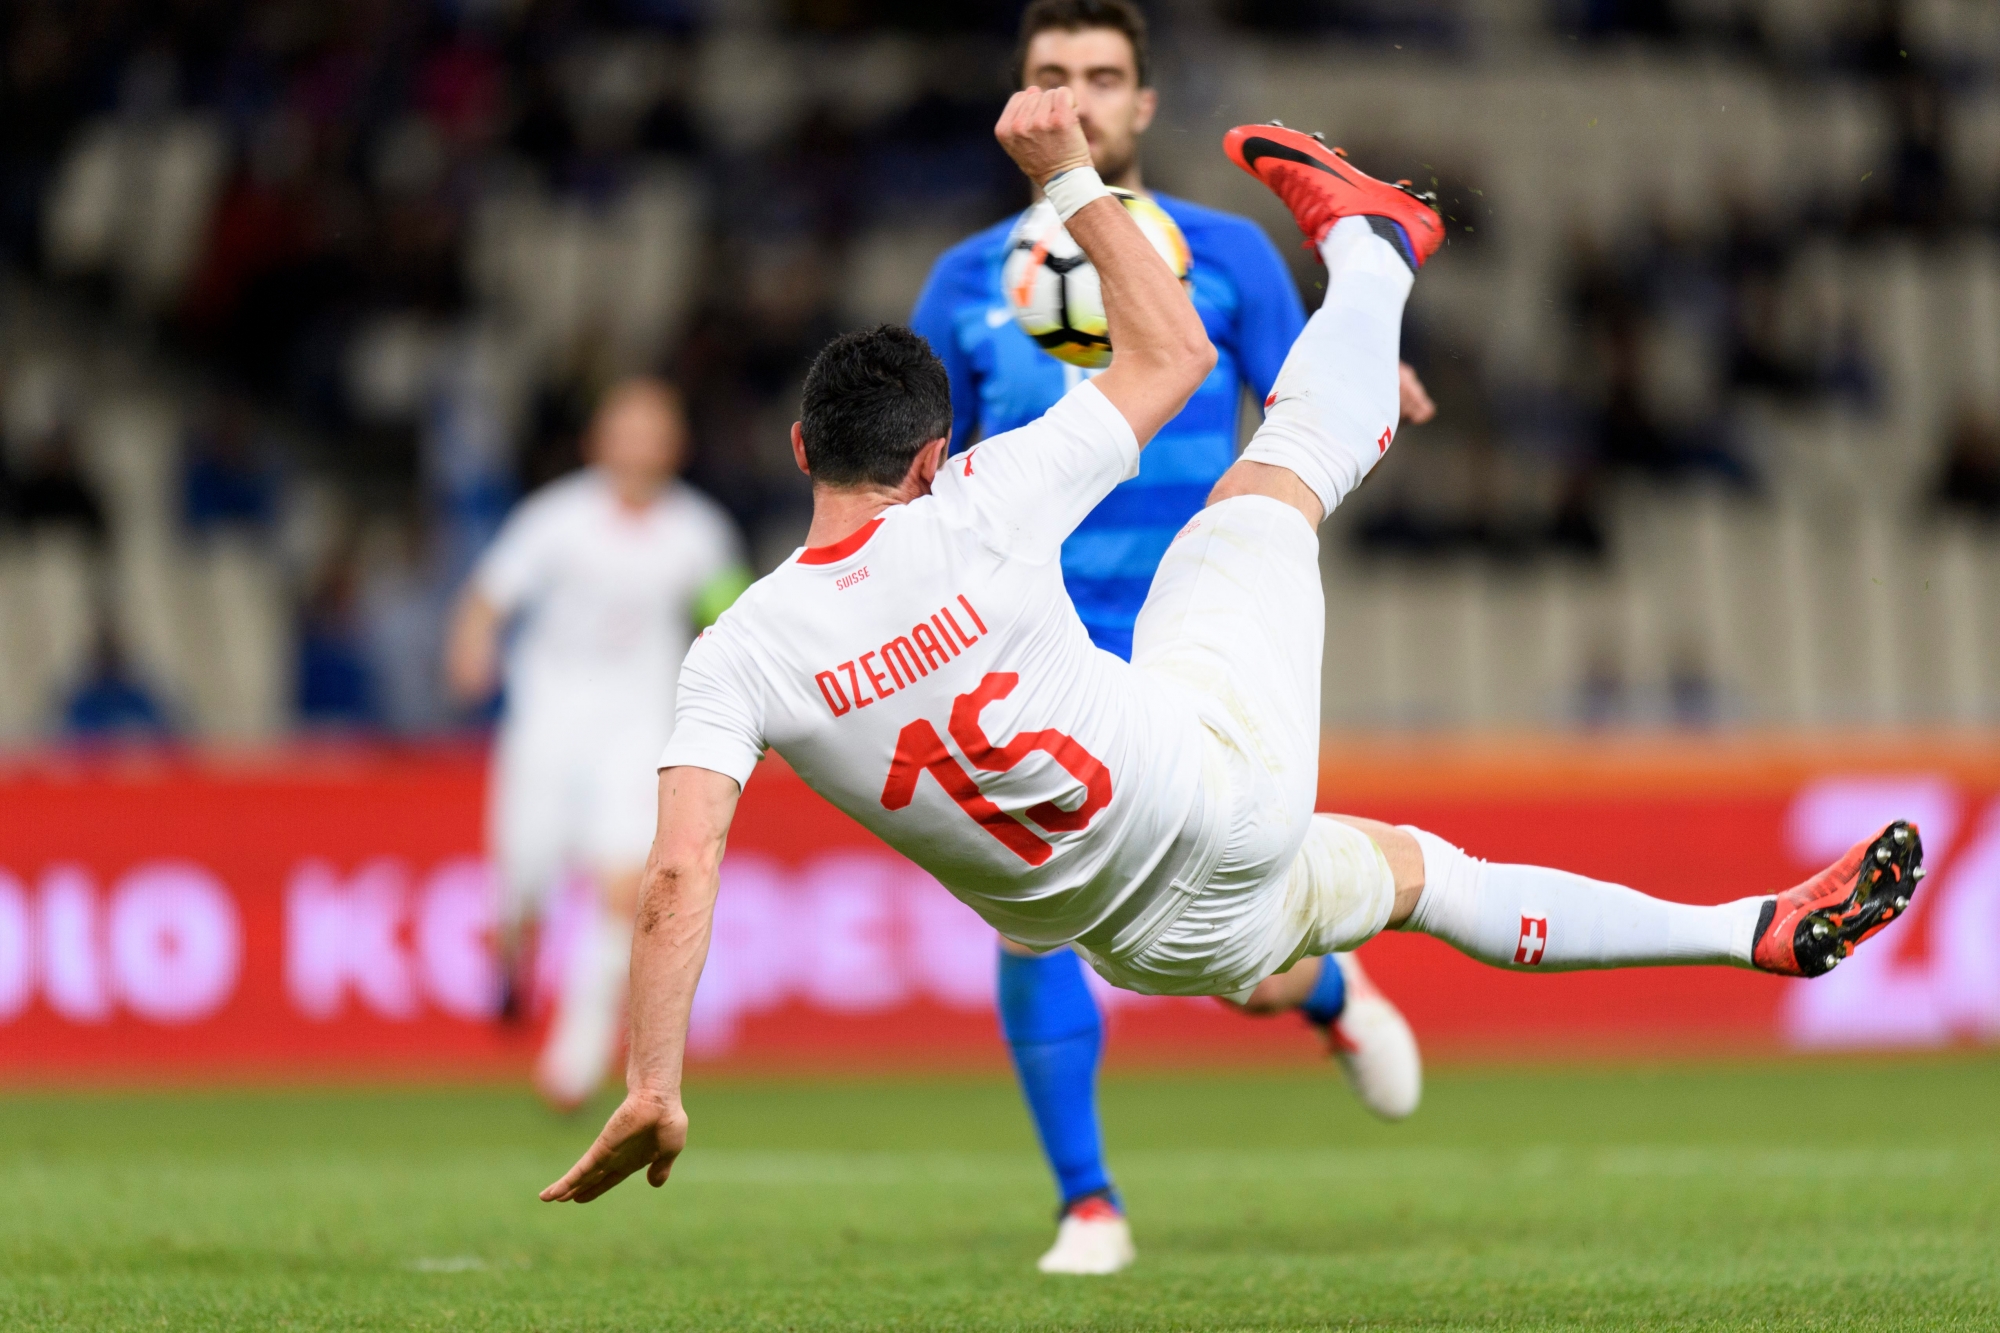 Switzerland's midfielder Blerim Dzemaili score the 1 - 0 during an international friendly soccer match between Greece and Switzerland at the Olympic stadium, in Athens, Greece, Friday, March 23, 2018. The Swiss team is spending 6 days in Greece in preparation for the upcomming 2018 Fifa World Cup in Russia. (KEYSTONE/Laurent Gillieron) GREECE SOCCER FRIENDLY GREECE SWITZERLAND